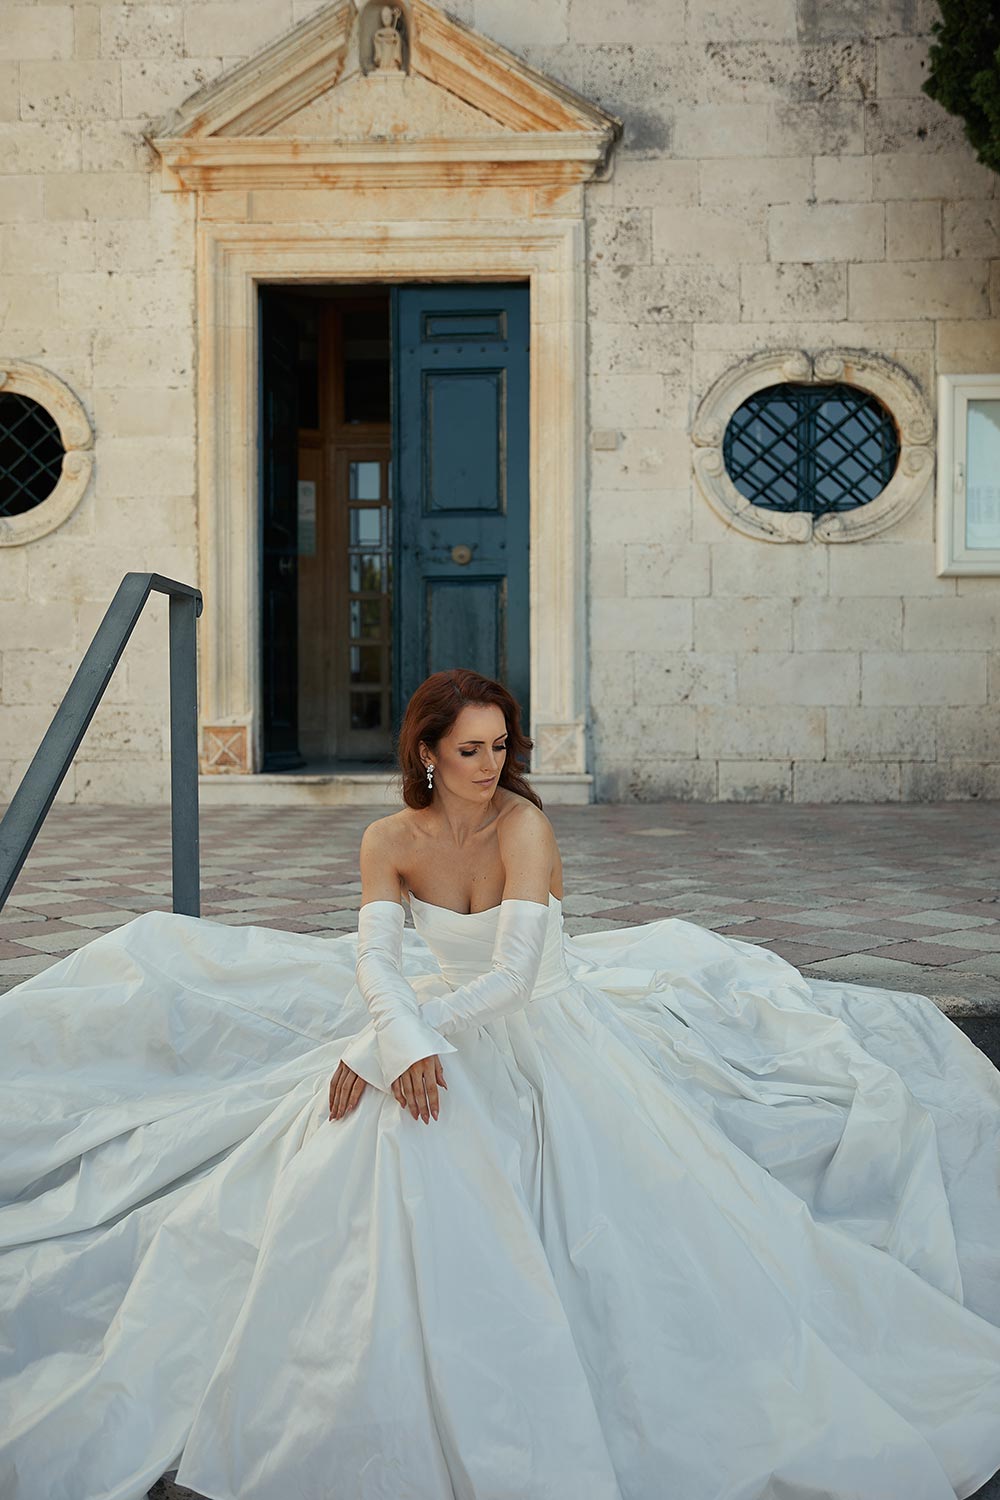 Marija, a layered dupion silk wedding gown of regal romance. Features a scoop neckline, draped bodice, detachable sleeves and bow, and a long train. From Vinka Design